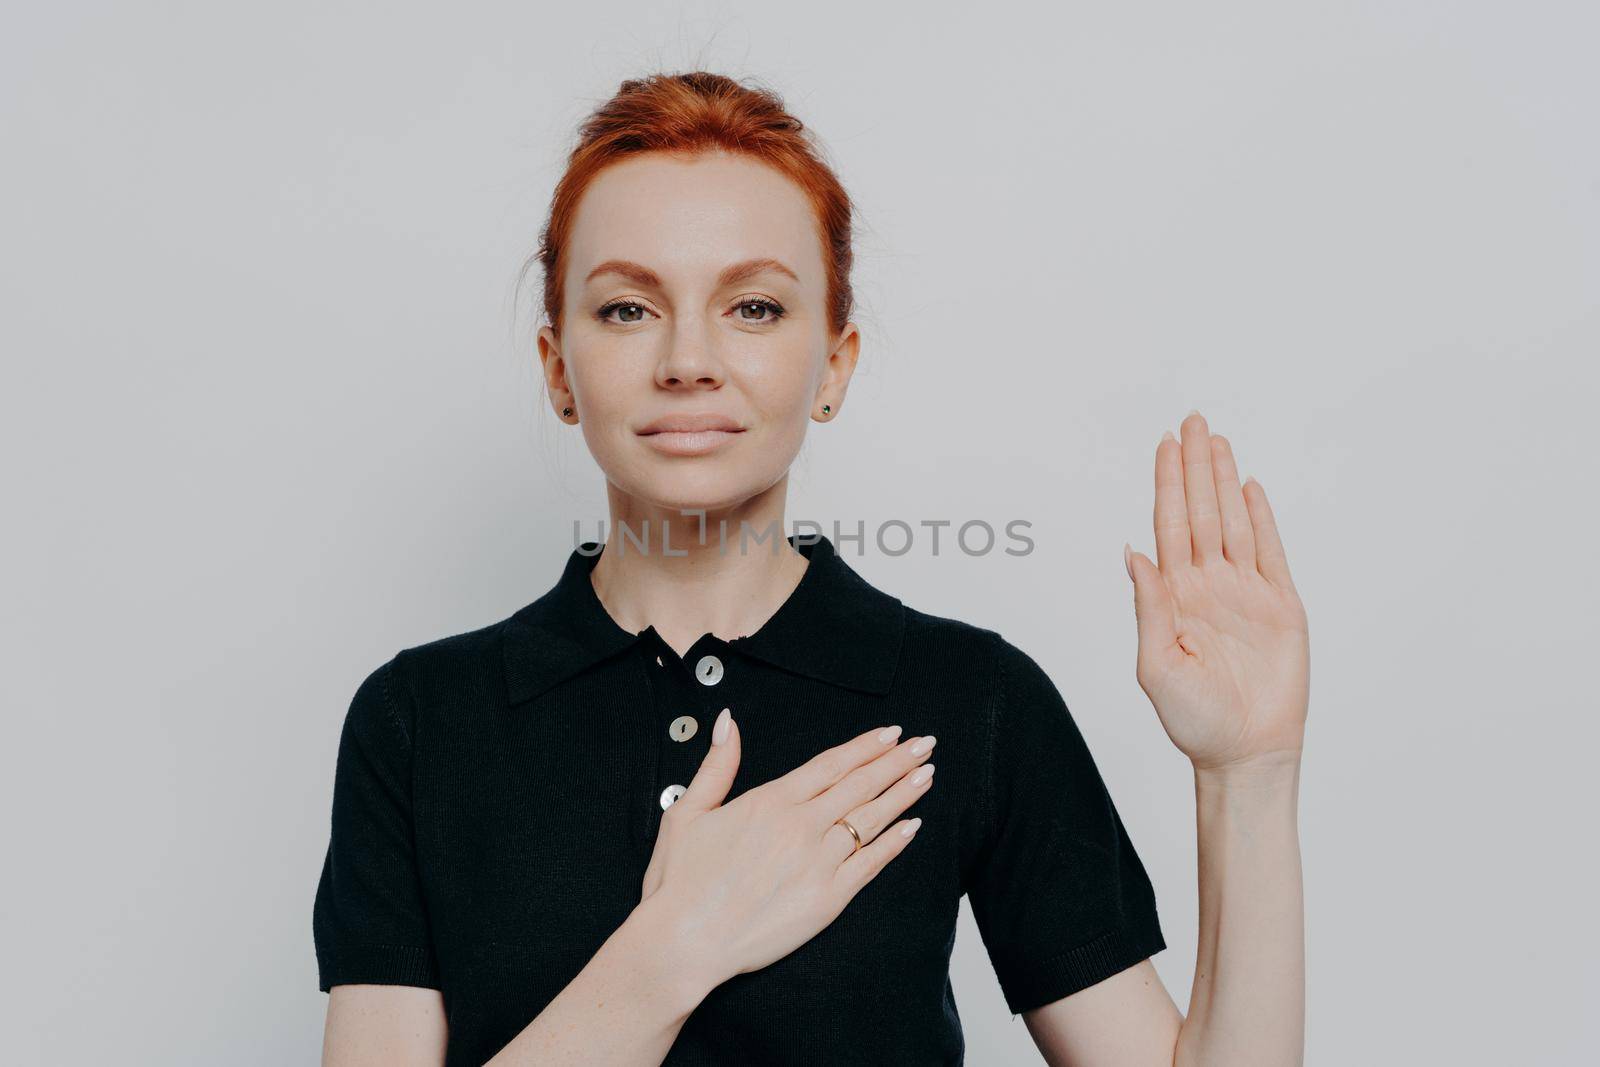 Beautiful red-haired patriotic woman wearing black t-shirt swearing with hand on chest and open palm, making loyalty promise oath while posing isolated over grey studio background